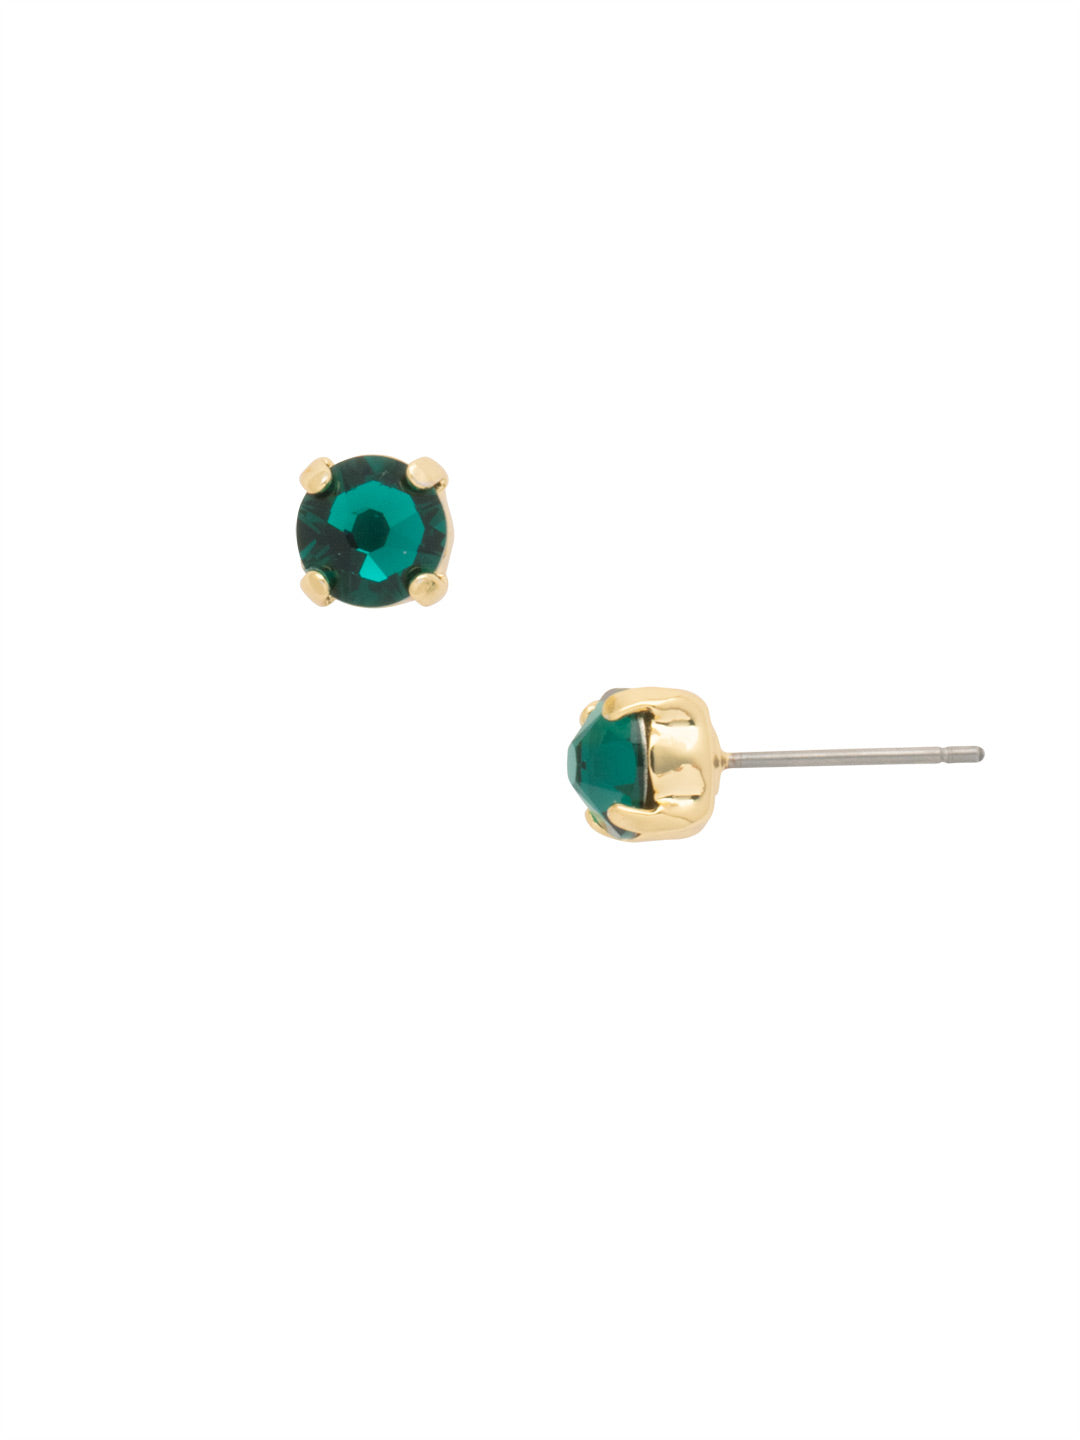 Jayda Stud Earrings - EDN32BGEME - <p>The Jayda Stud Earrings are the perfect every day wardrobe staple. A round crystal nestles perfectly in a metal plated post with four prongs. </p><p>Need help picking a stud? <a href="https://www.sorrelli.com/blogs/sisterhood/round-stud-earrings-101-a-rundown-of-sizes-styles-and-sparkle">Check out our size guide!</a> From Sorrelli's Emerald collection in our Bright Gold-tone finish.</p>